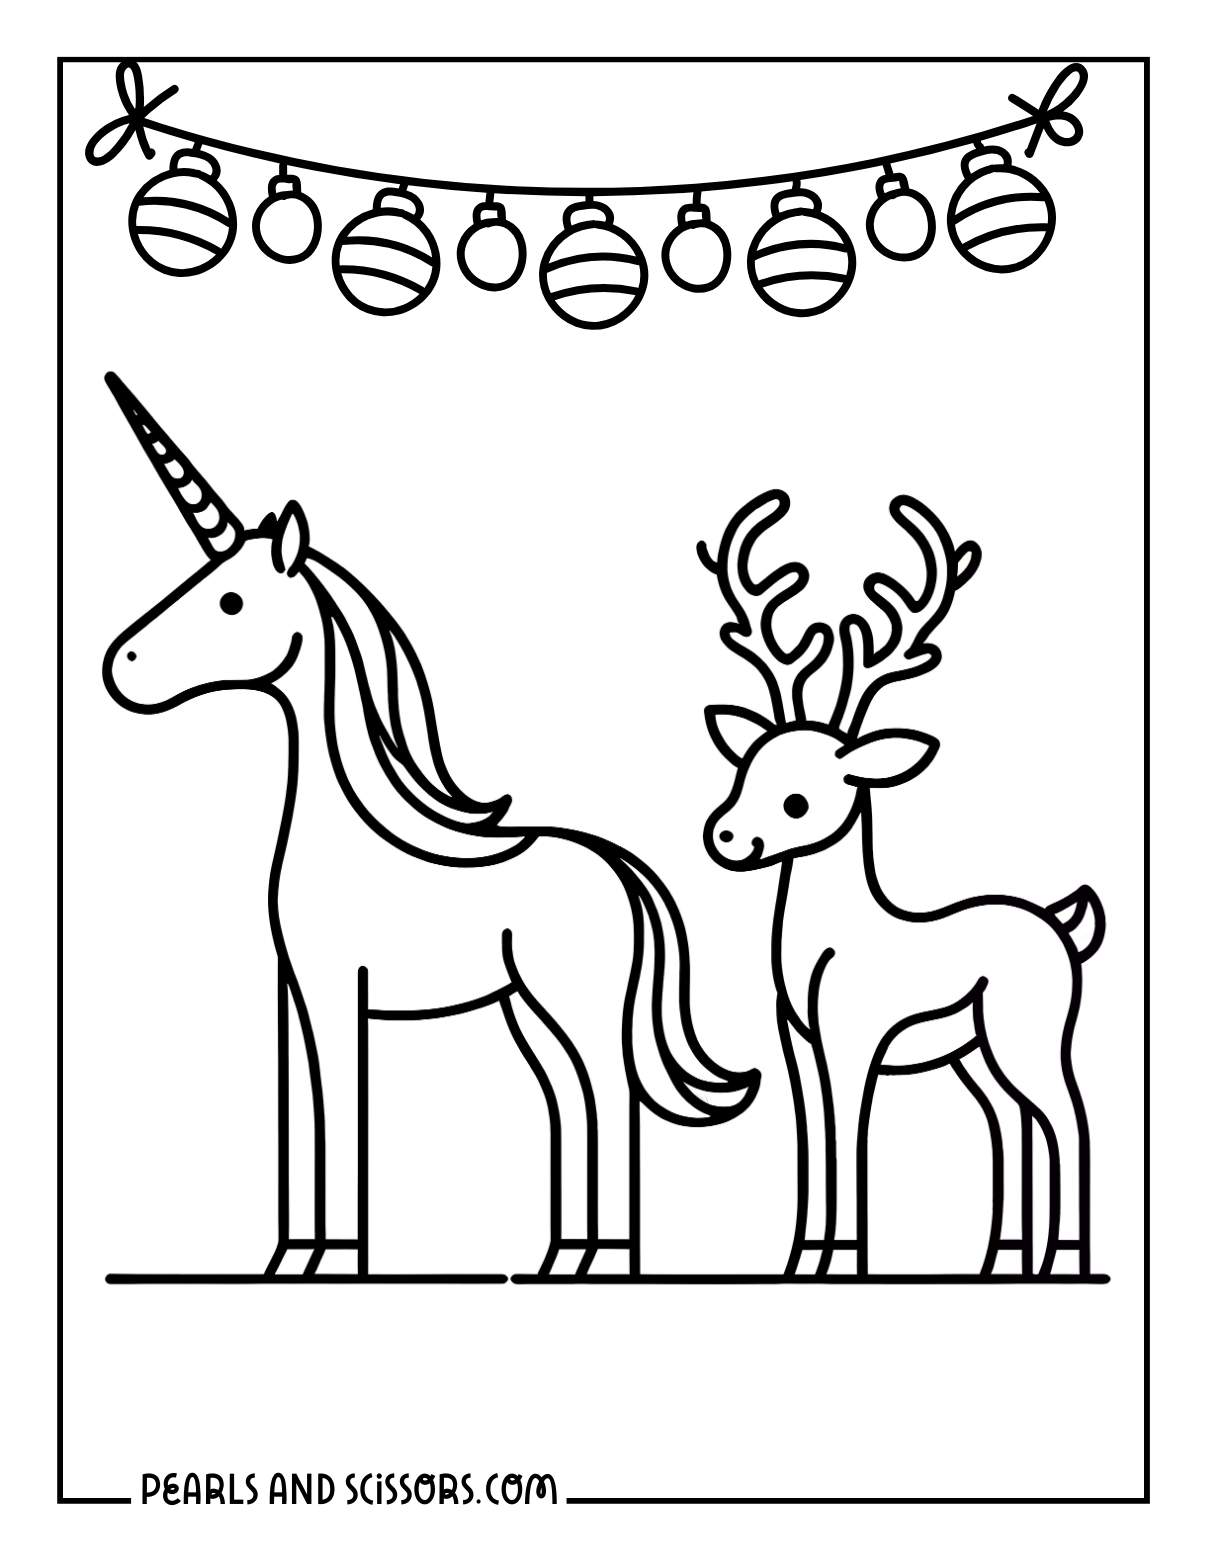 Unicorn and reindeer outline to color in for christmas.